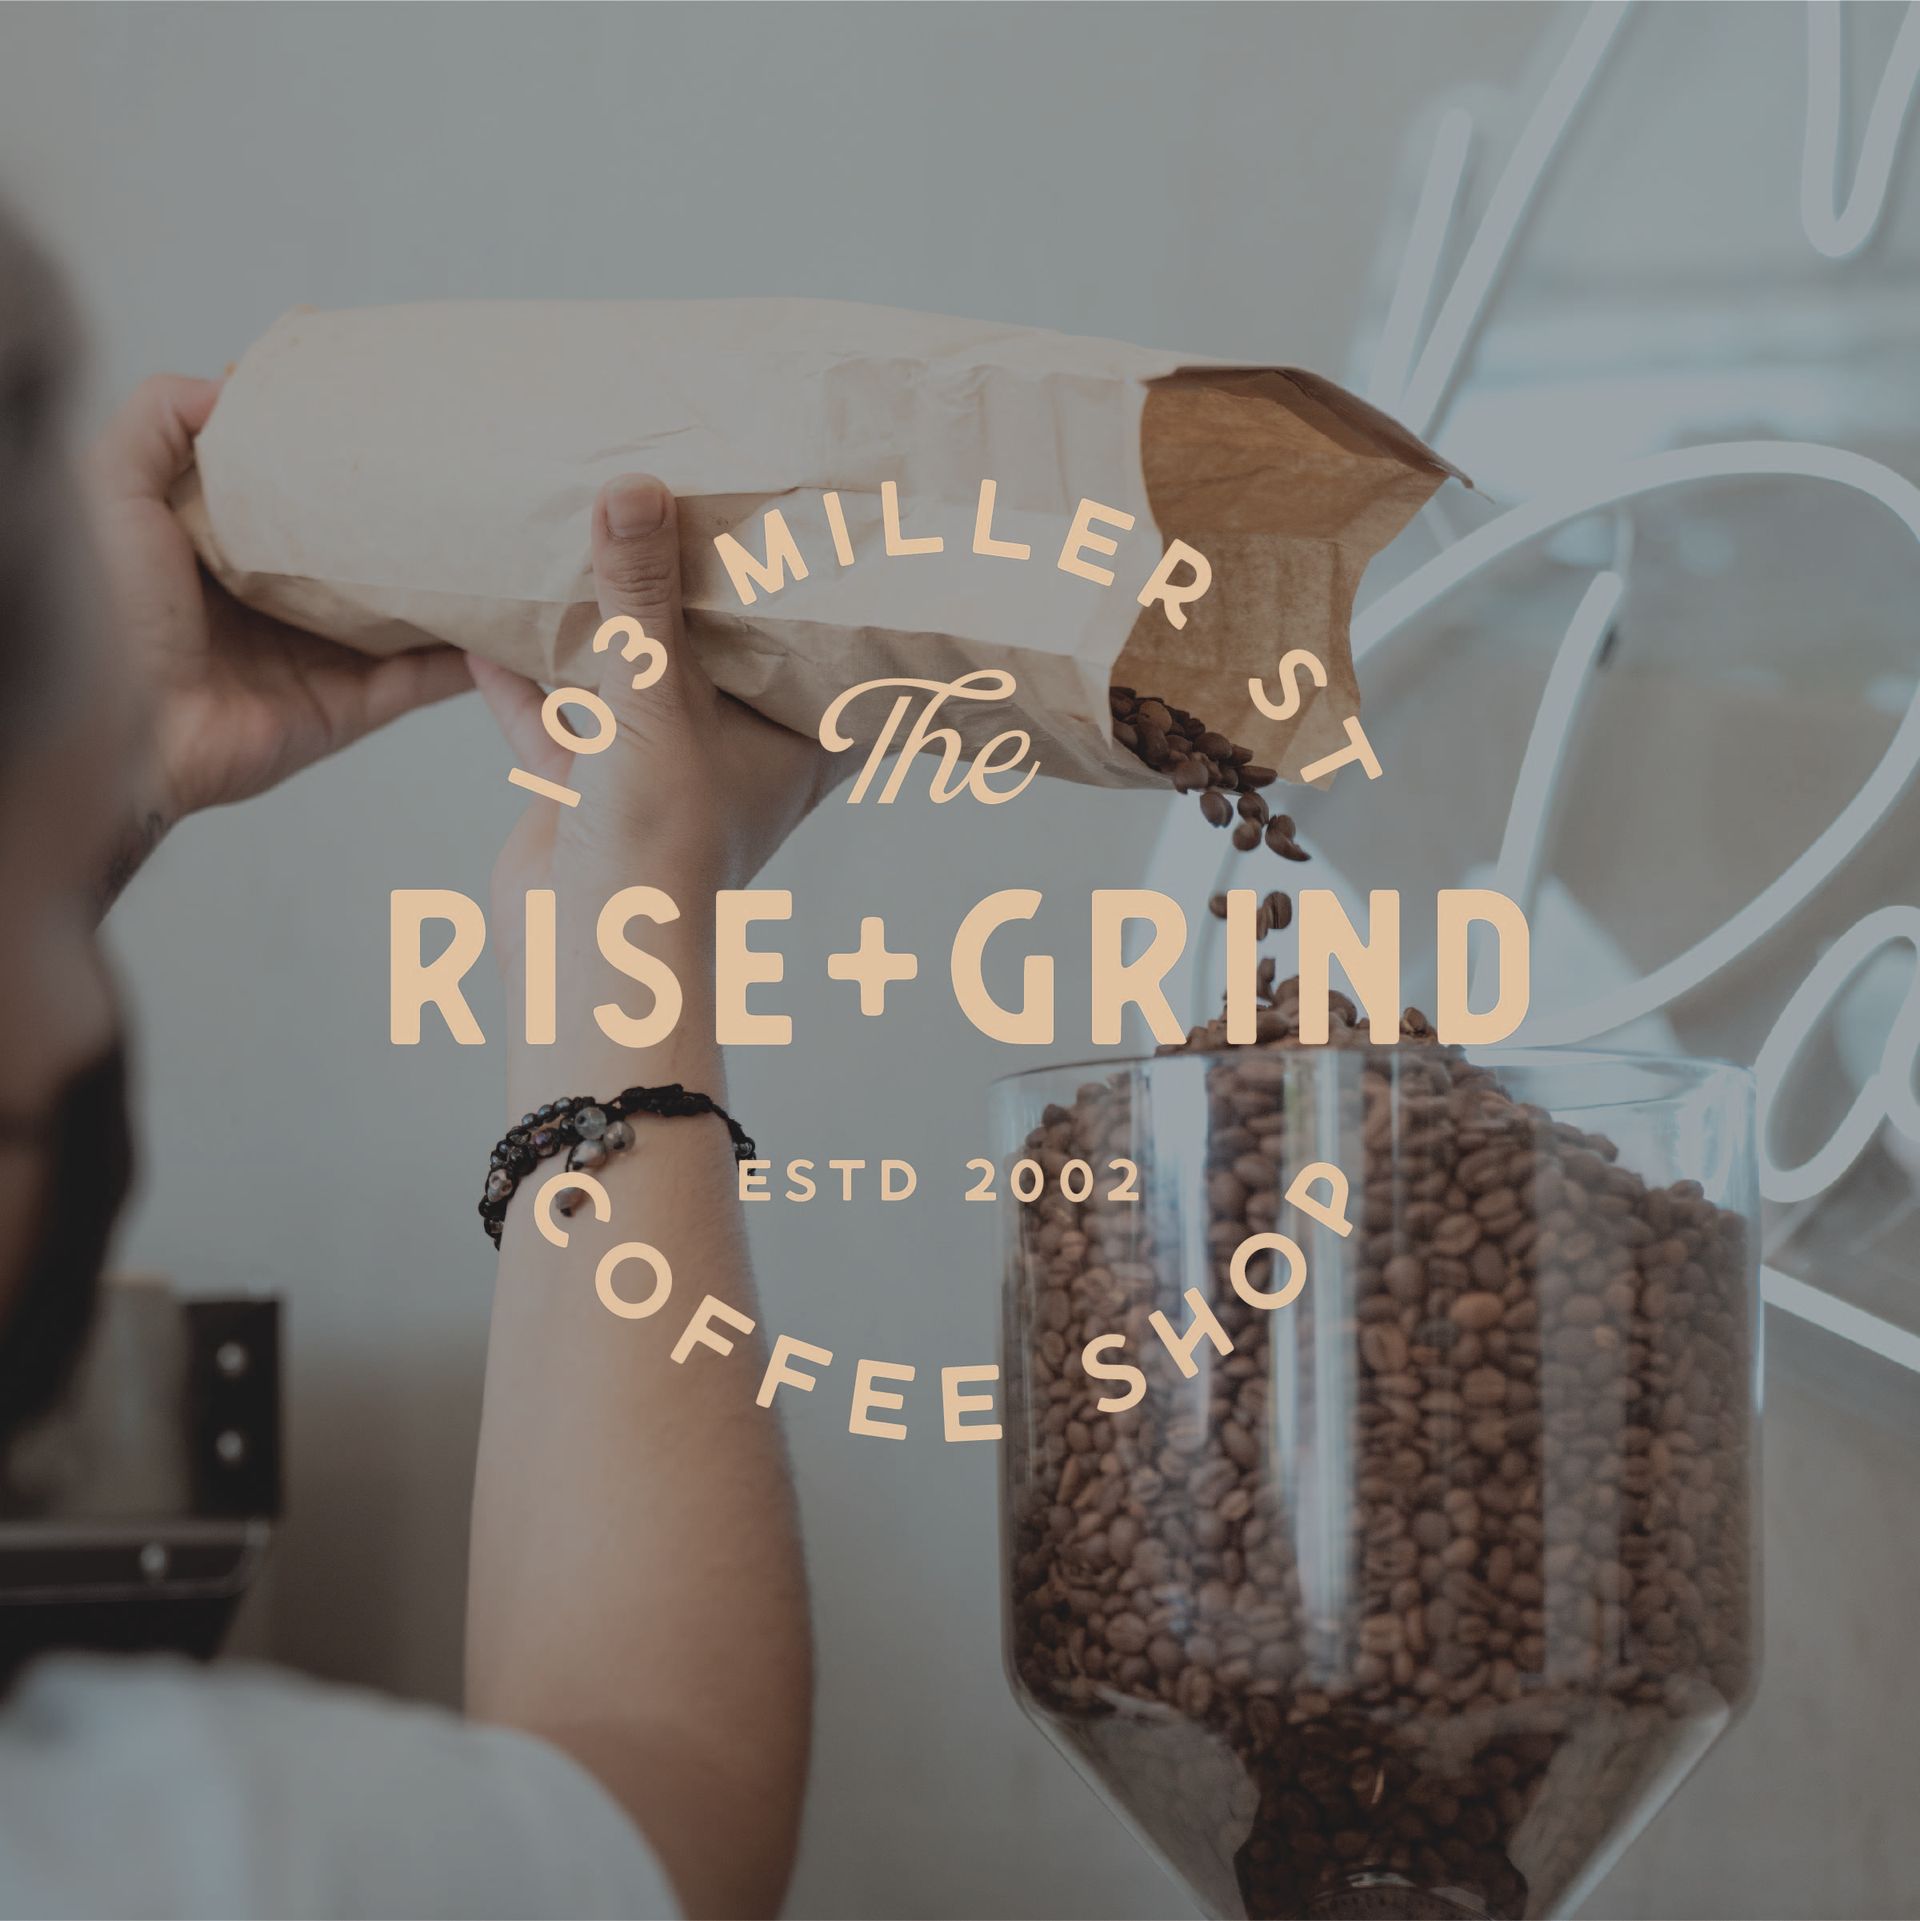 A logo for the rise and grind coffee shop